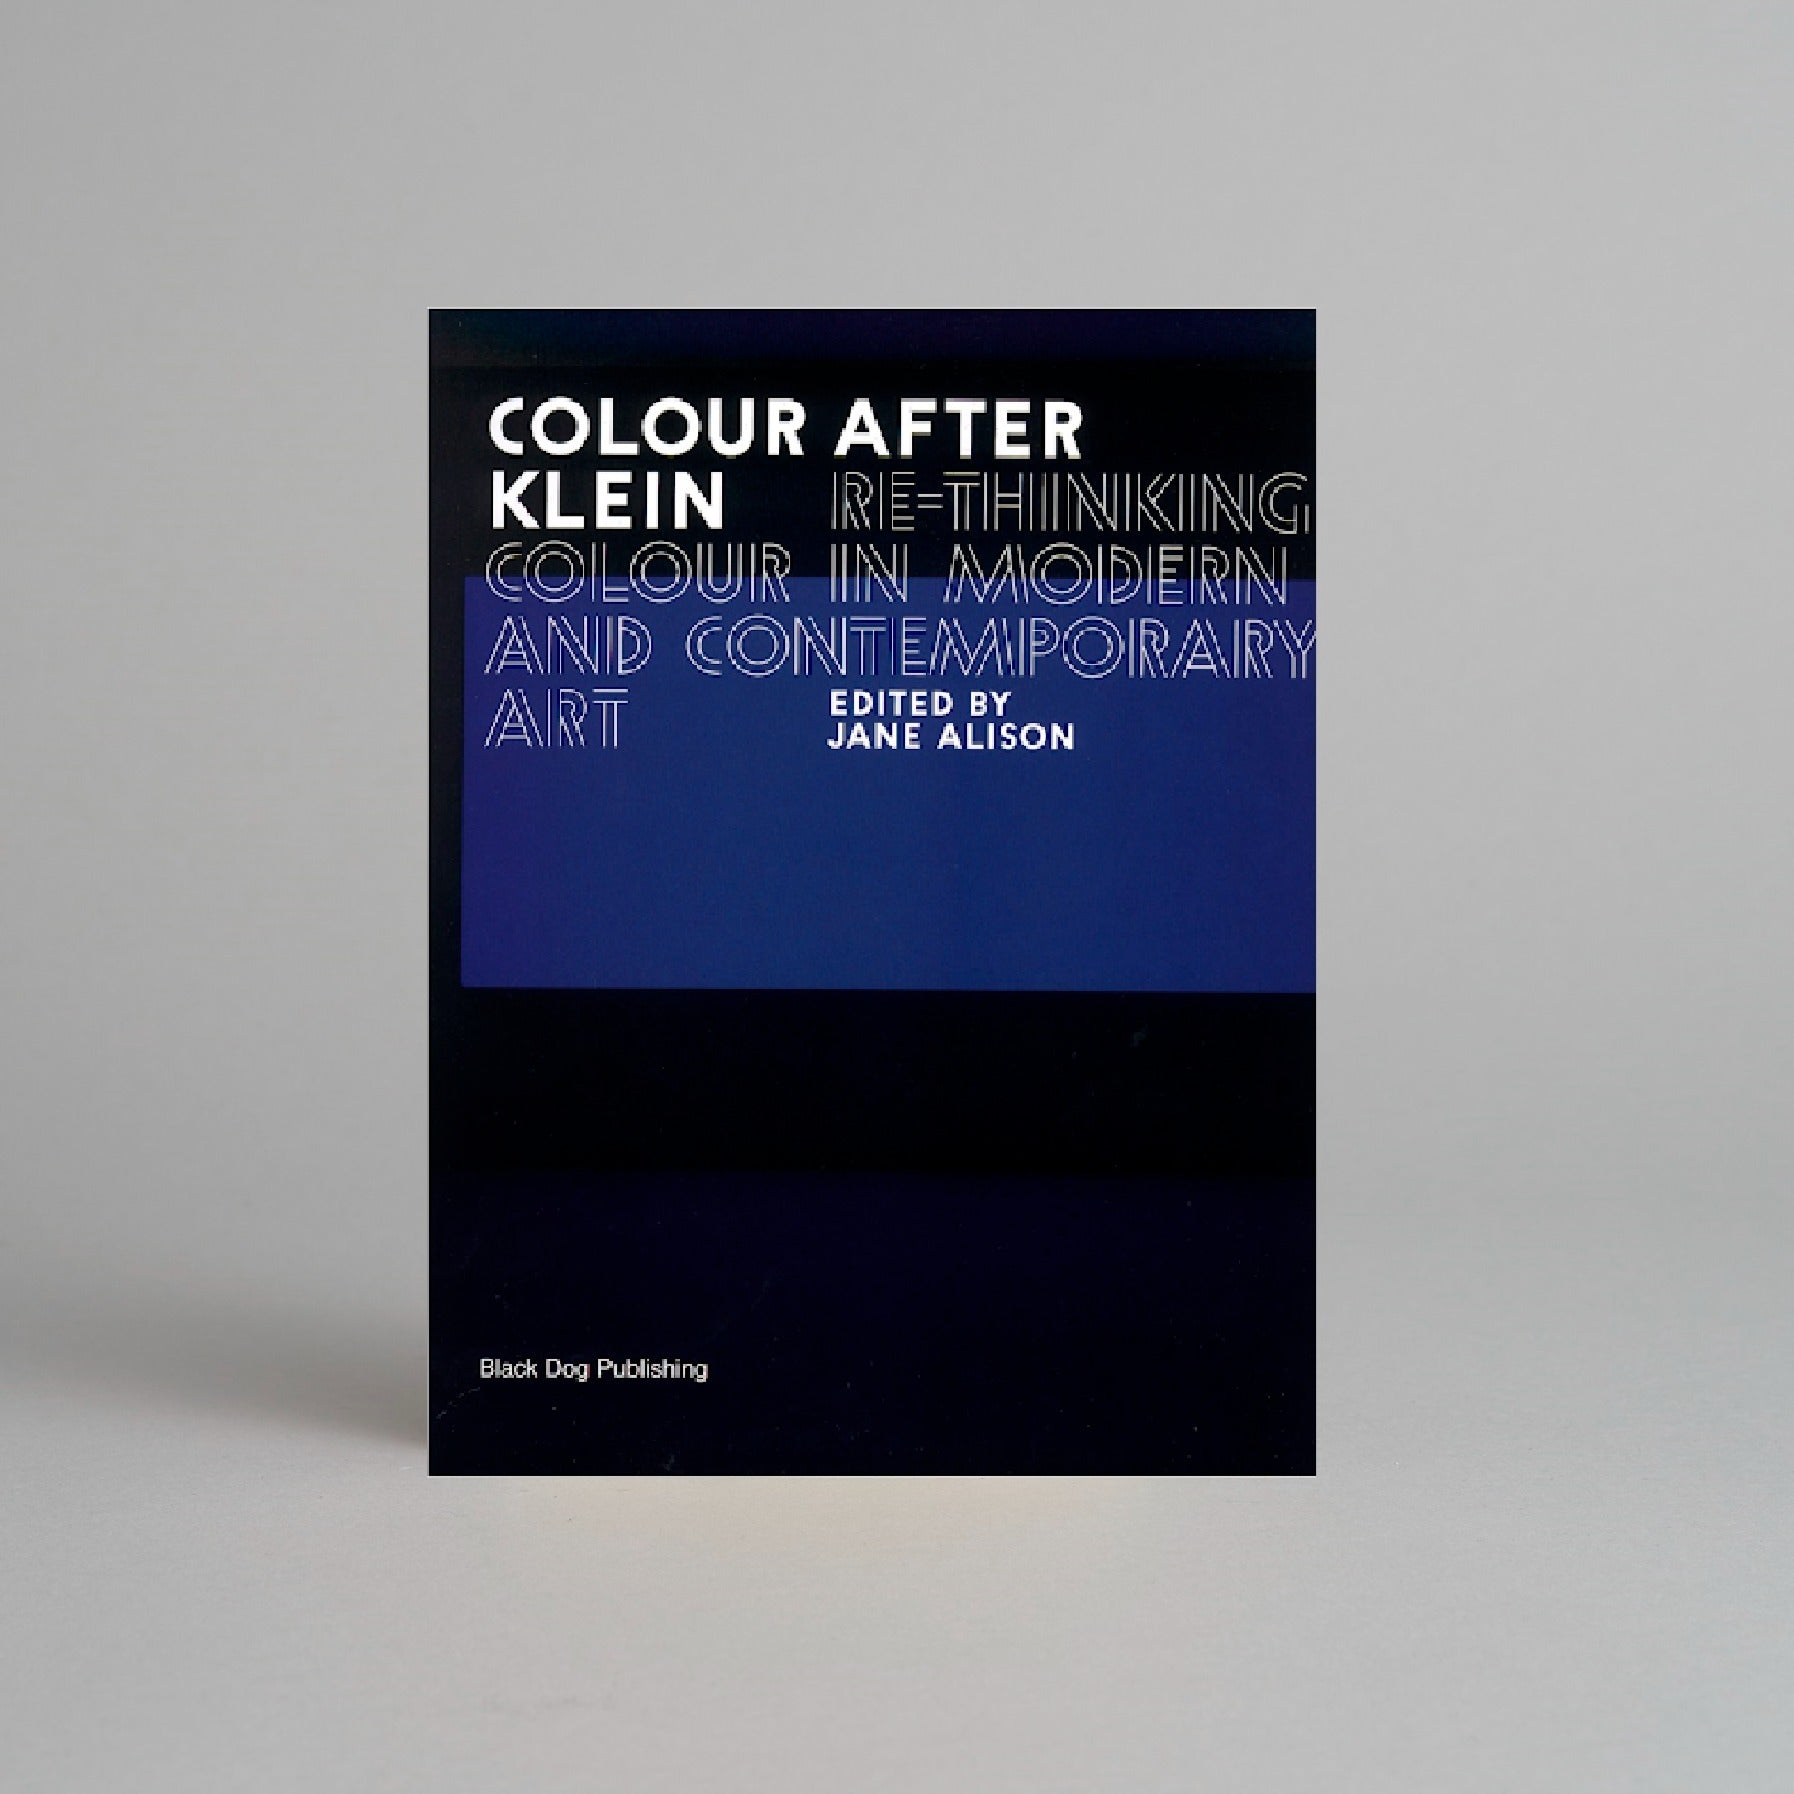 Colour After Klein: Re-thinking Colour in Modern and Contemporary Art